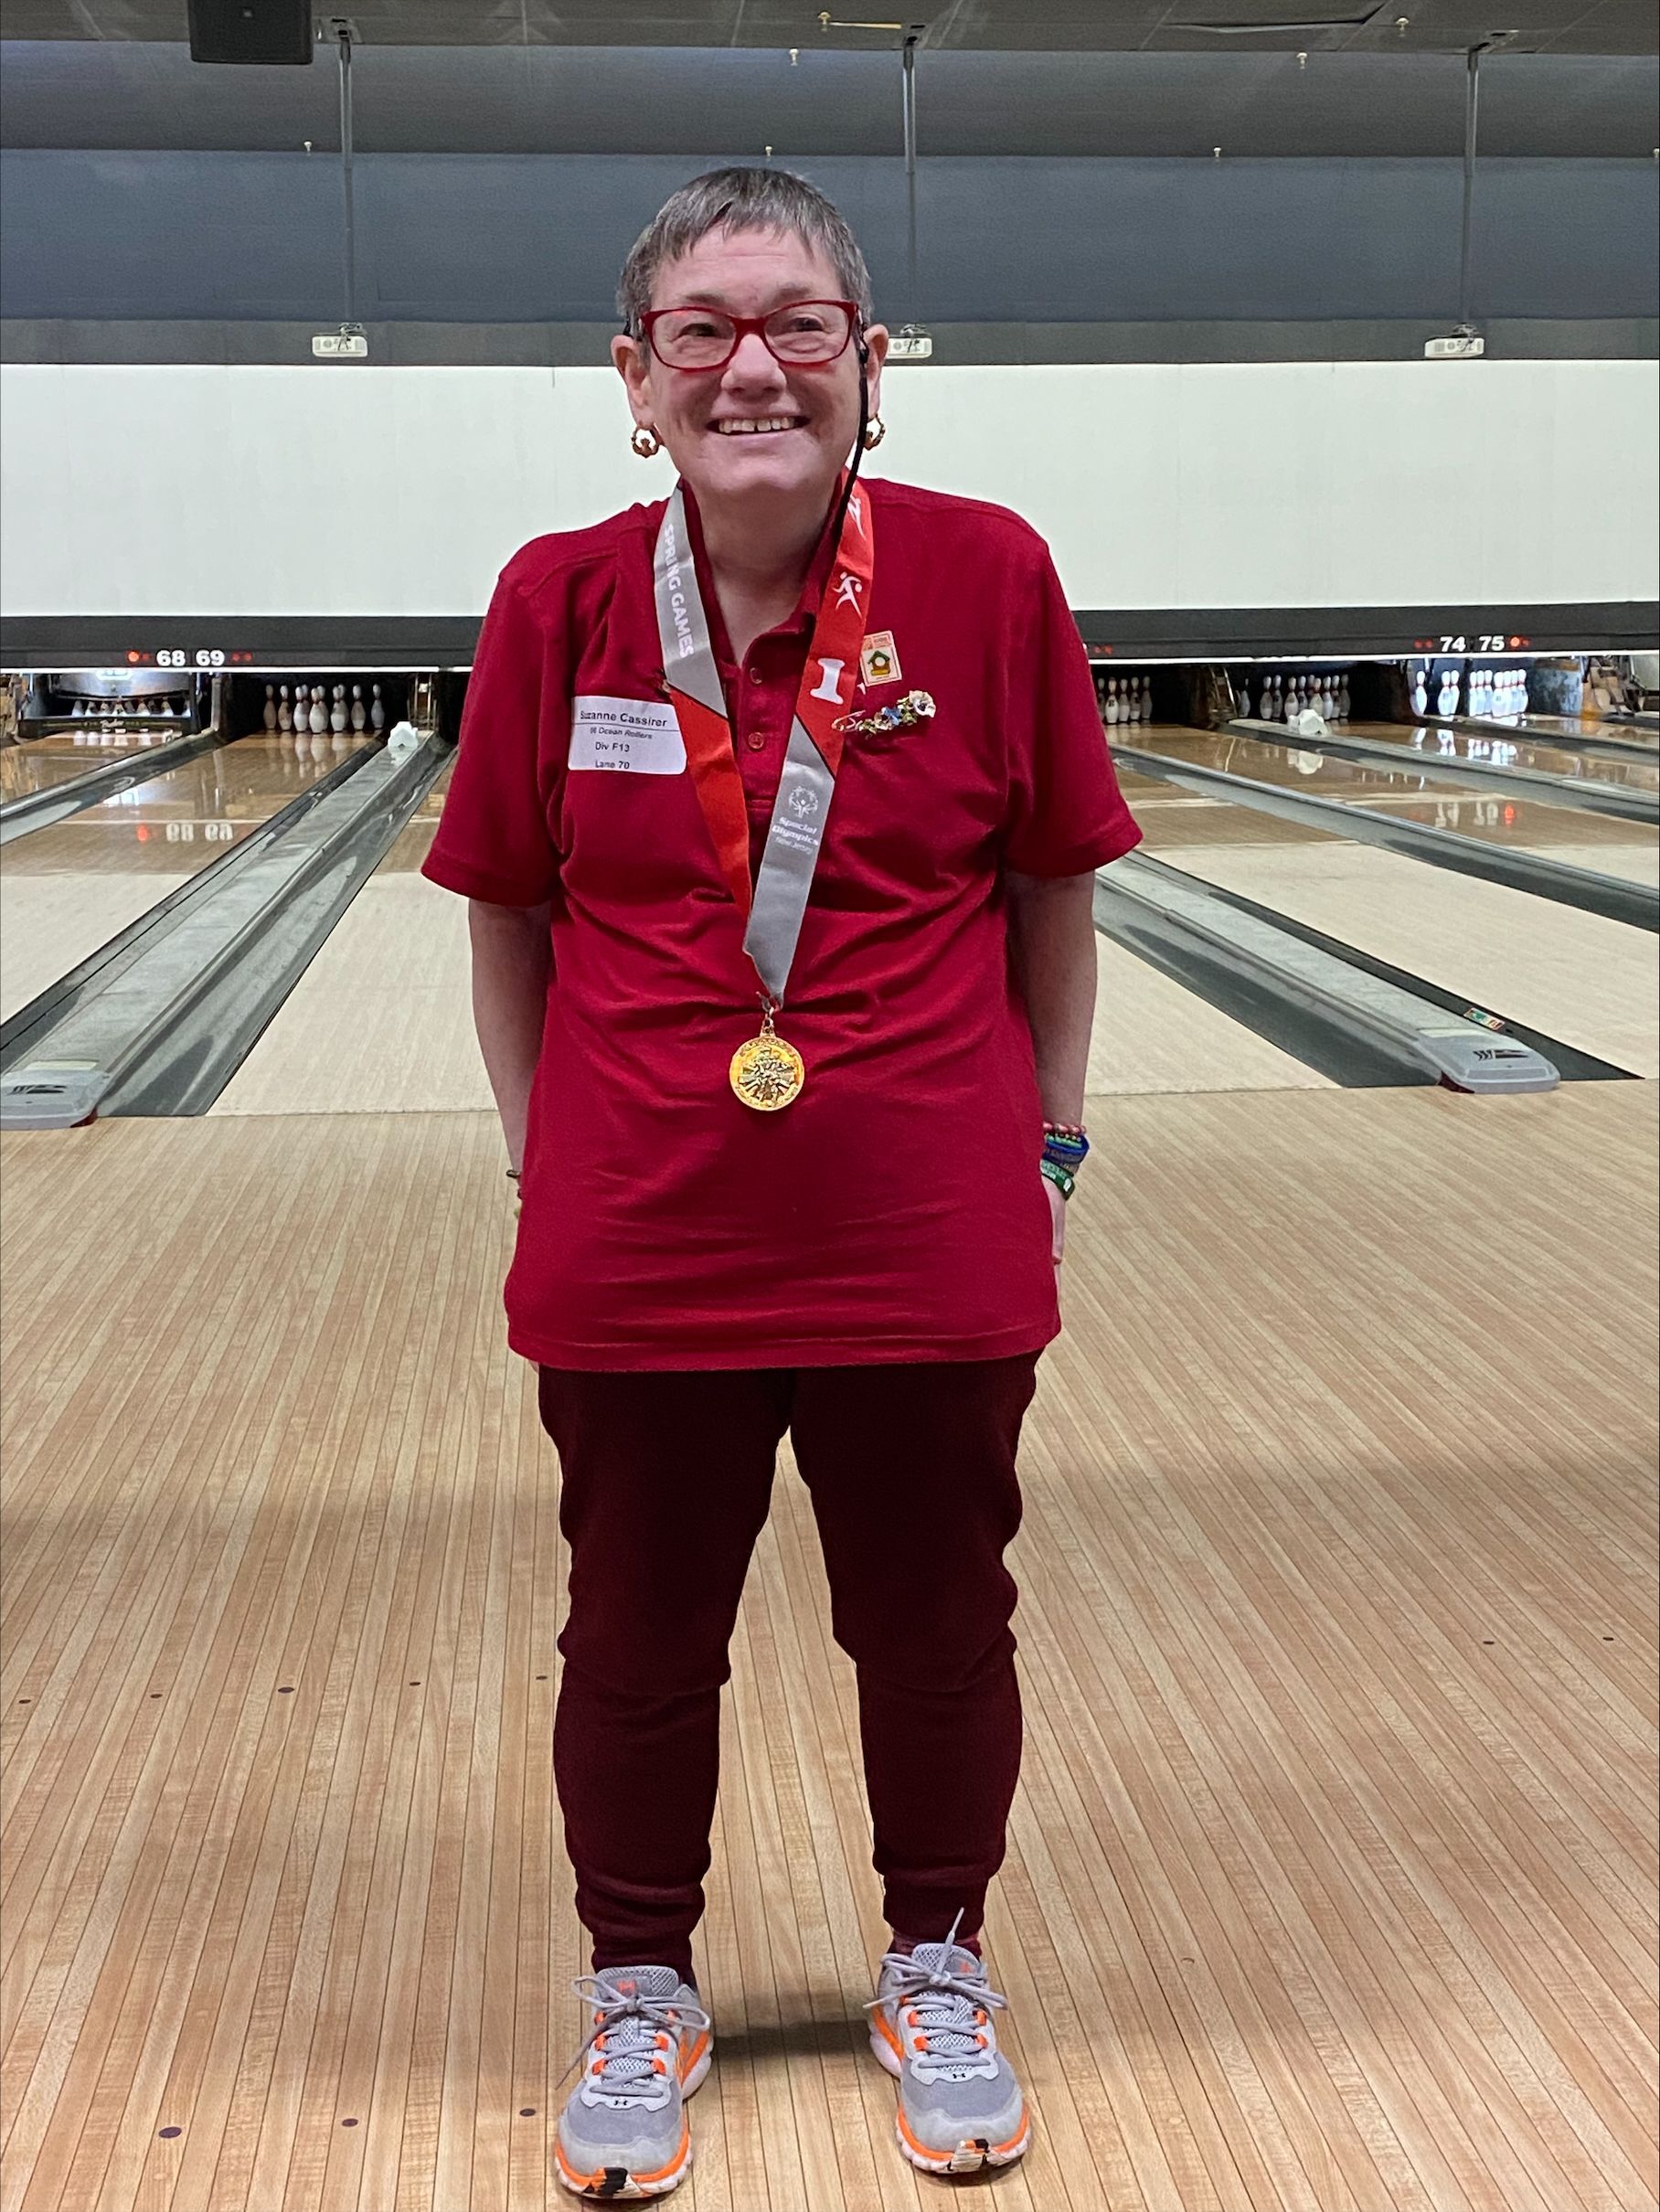 A smiling woman wearing a red shirt and gold medal.